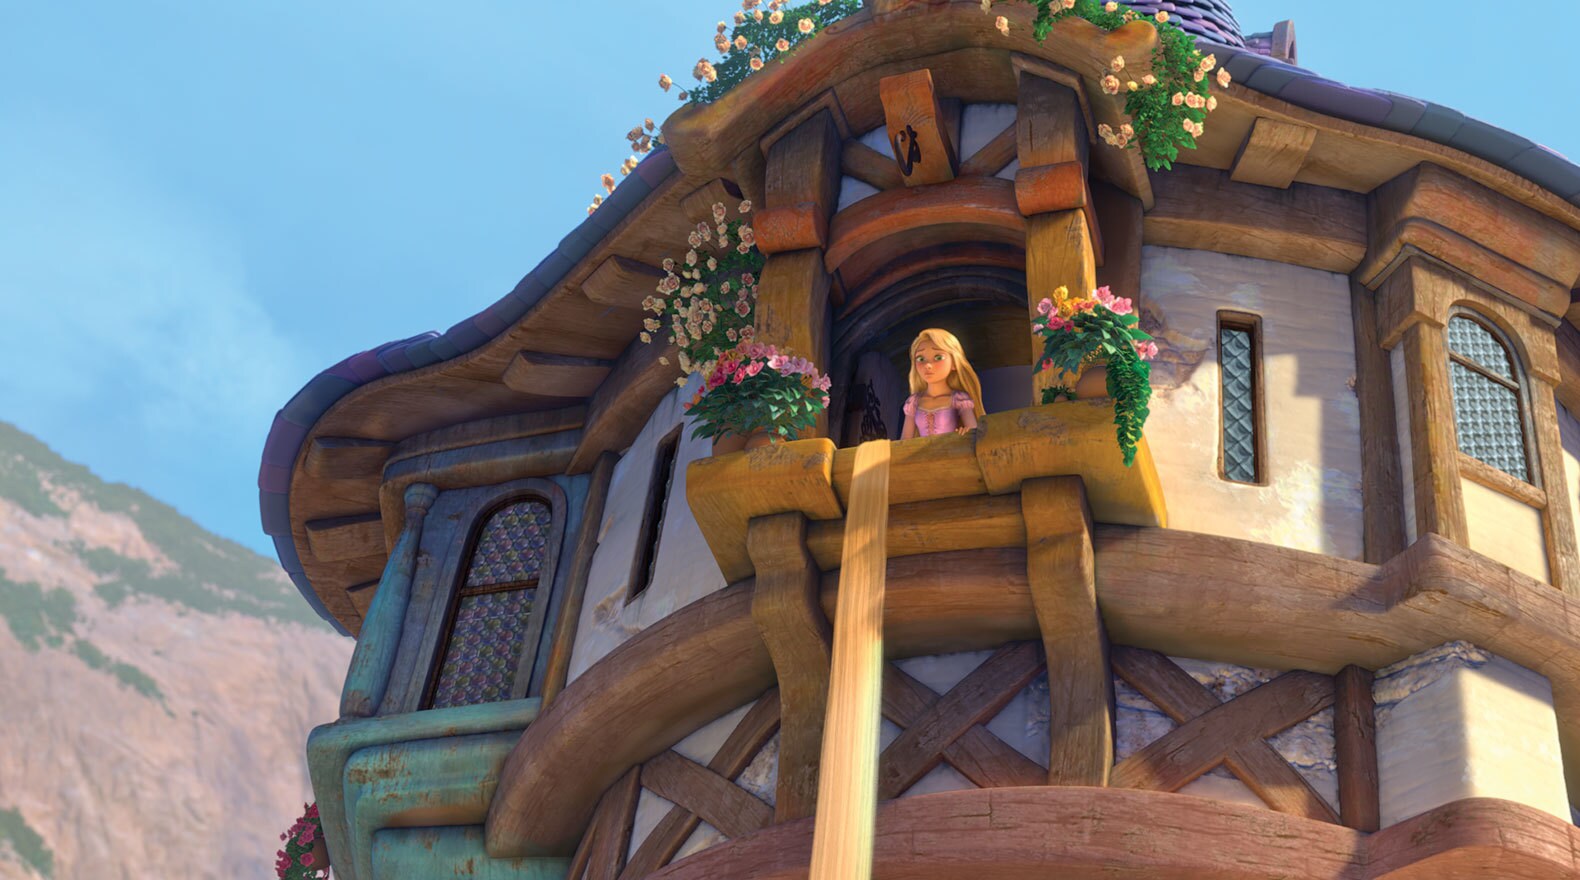 Rapunzel voiced by Mandy Moore hangs her hair out of her window